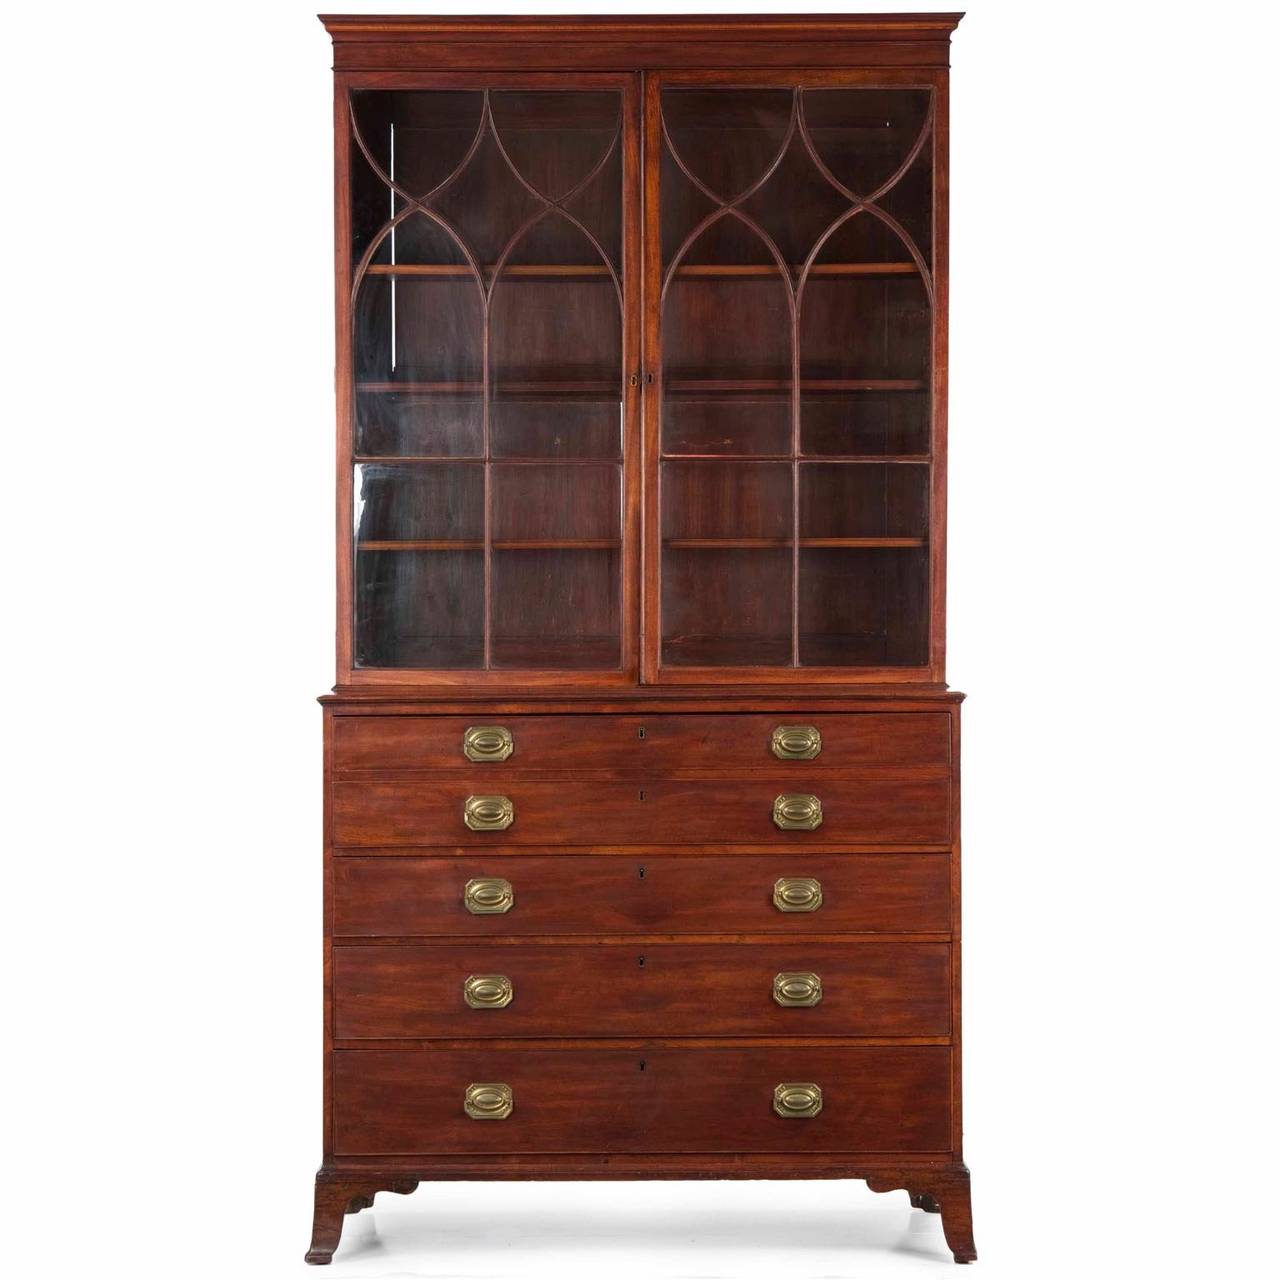 A superbly crafted and designed piece, this fine secretary desk is a rare survivor with nearly perfect originality throughout.  Other than the surface having been touched up over the years, the color vibrant and deep under countless layers of wax,